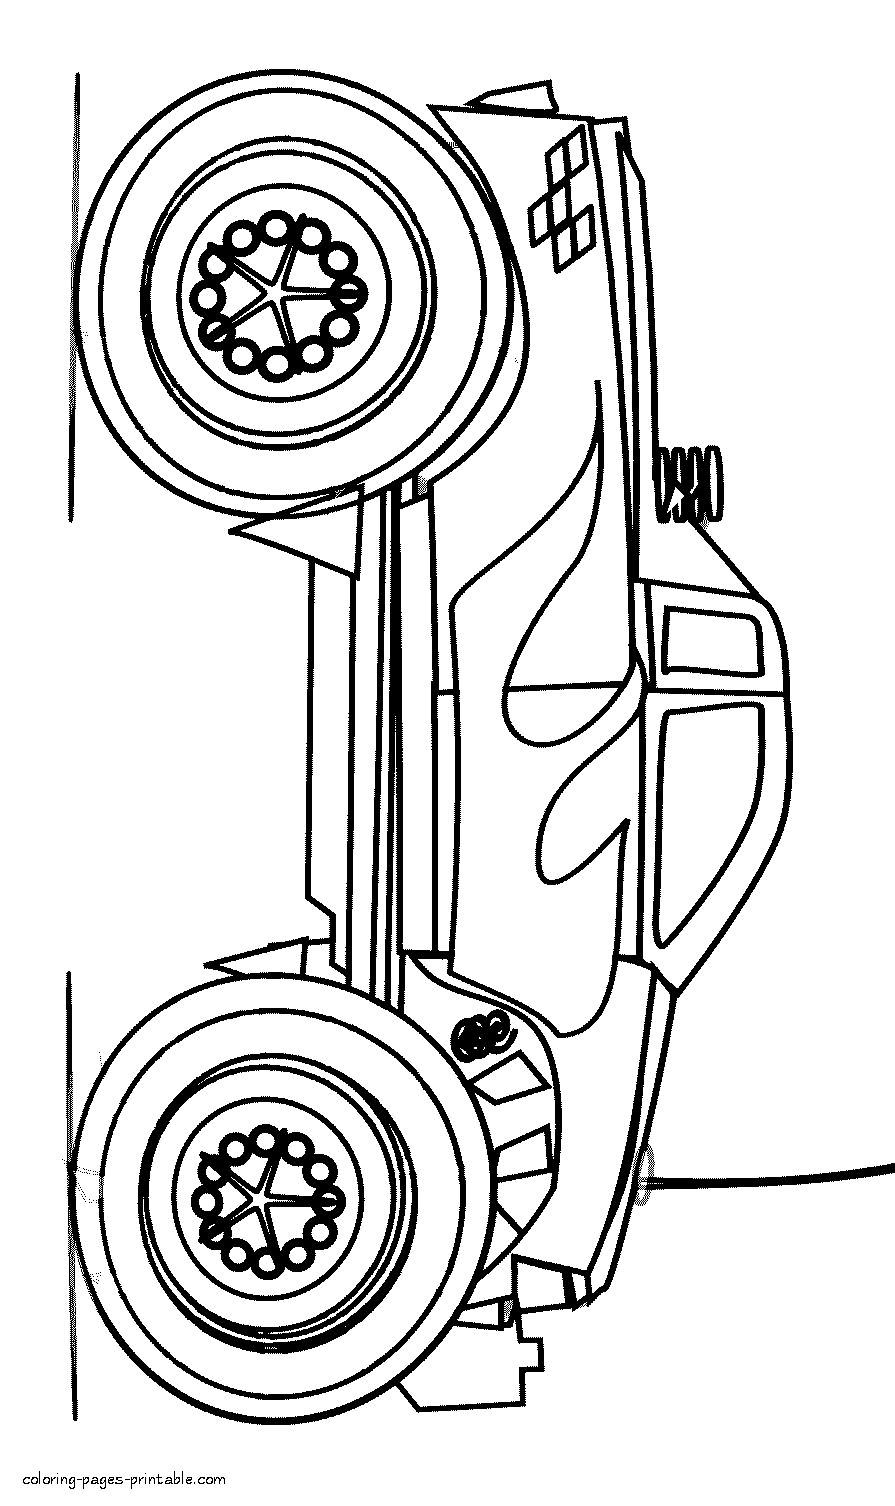 Simple monster truck coloring page